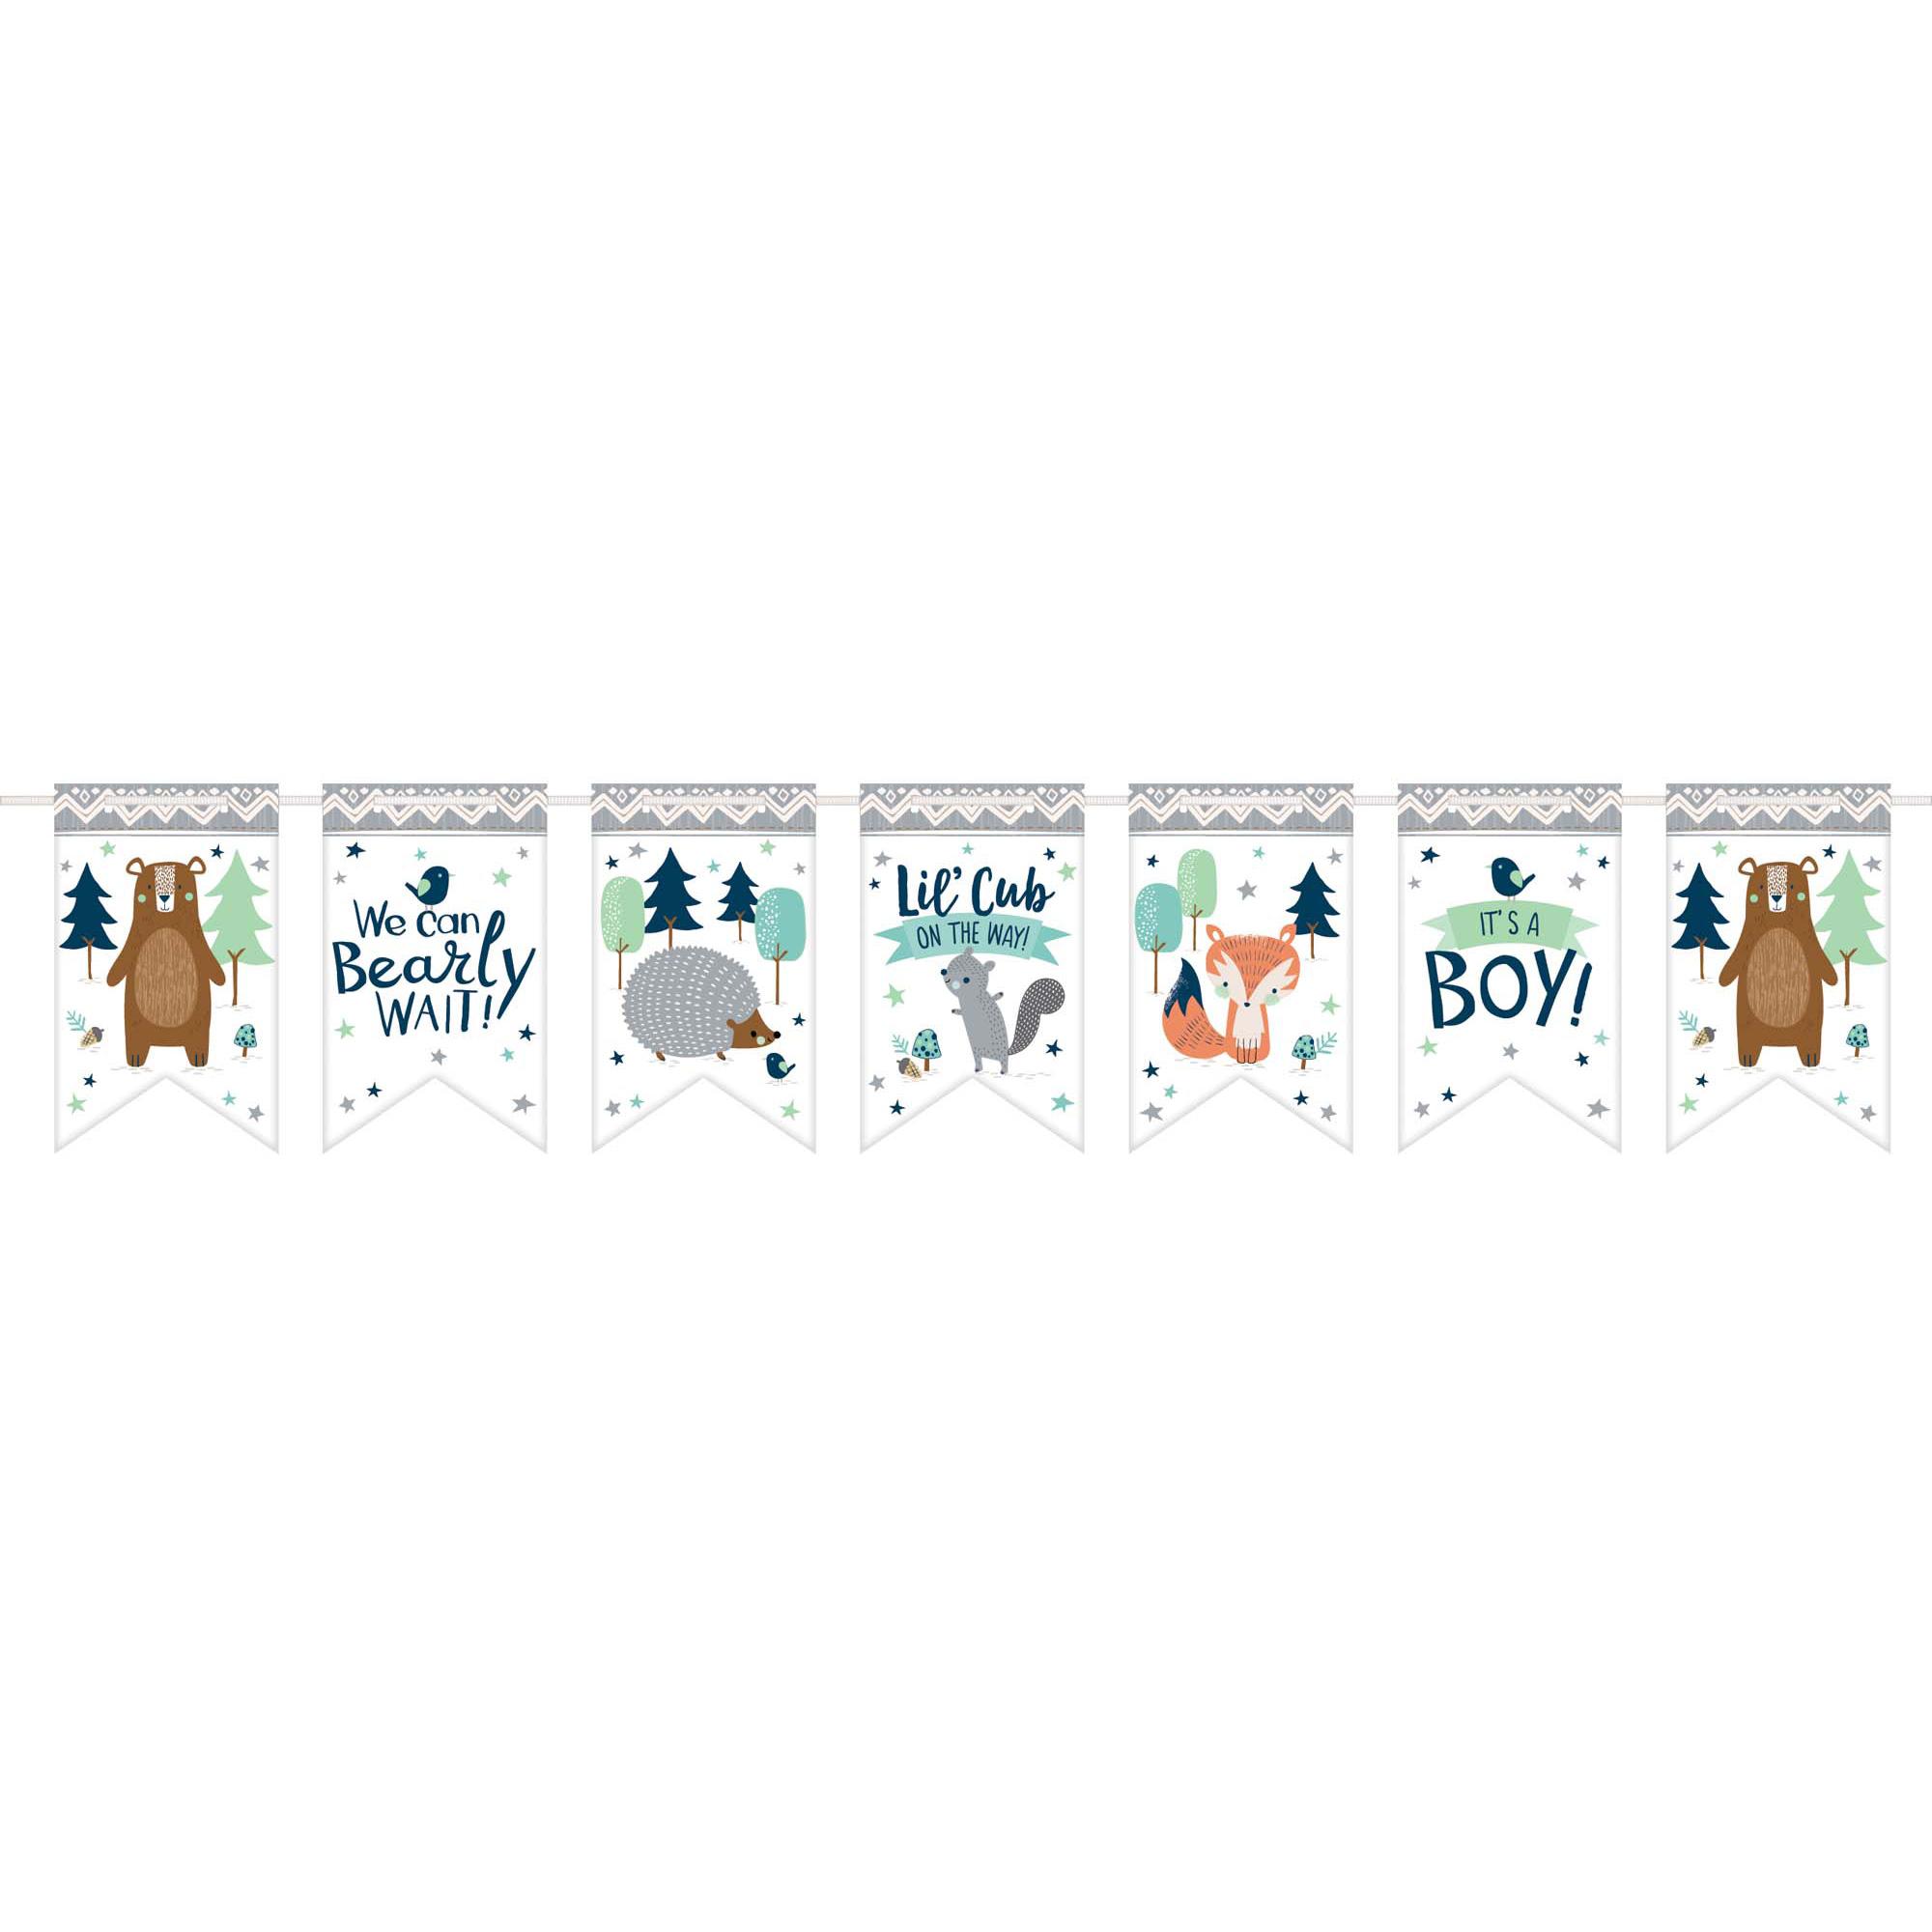 Bear-ly Wait Boy Pennant Banner 4.57m Decorations - Party Centre